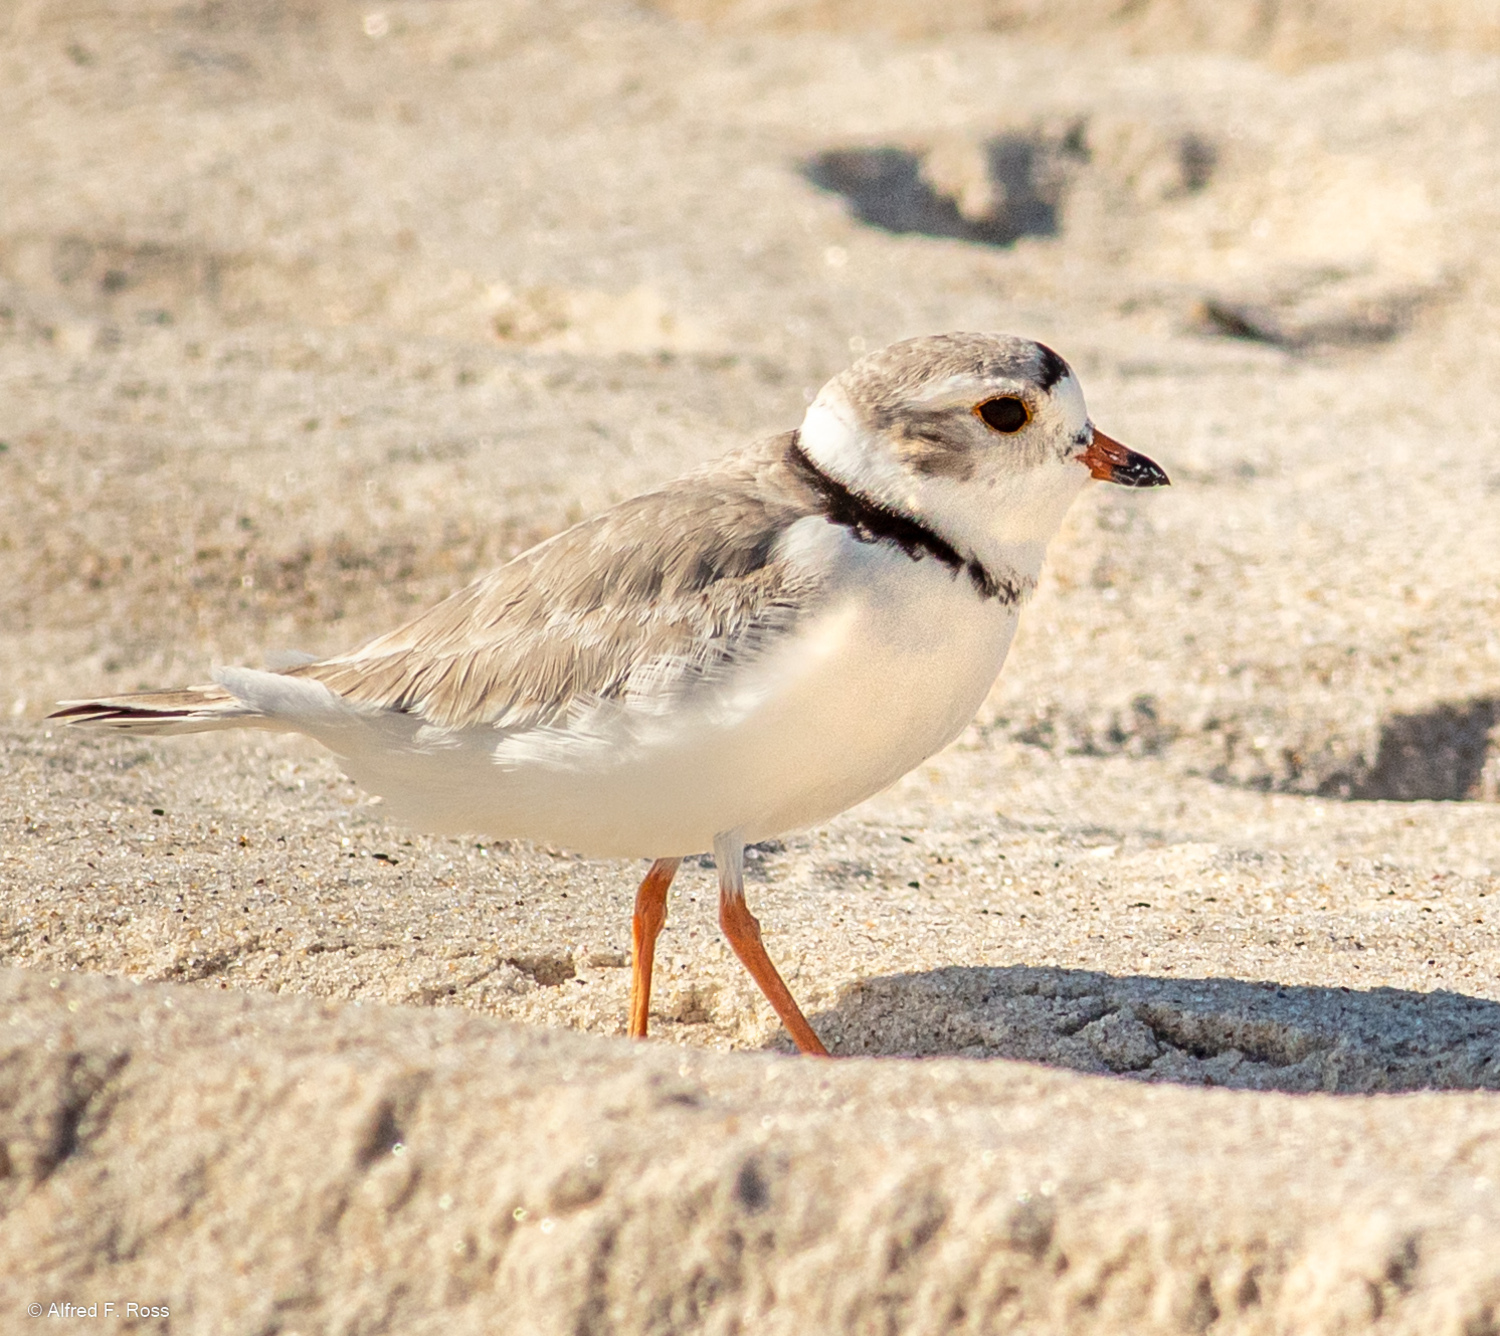 A piping plover. ALFRED ROSS